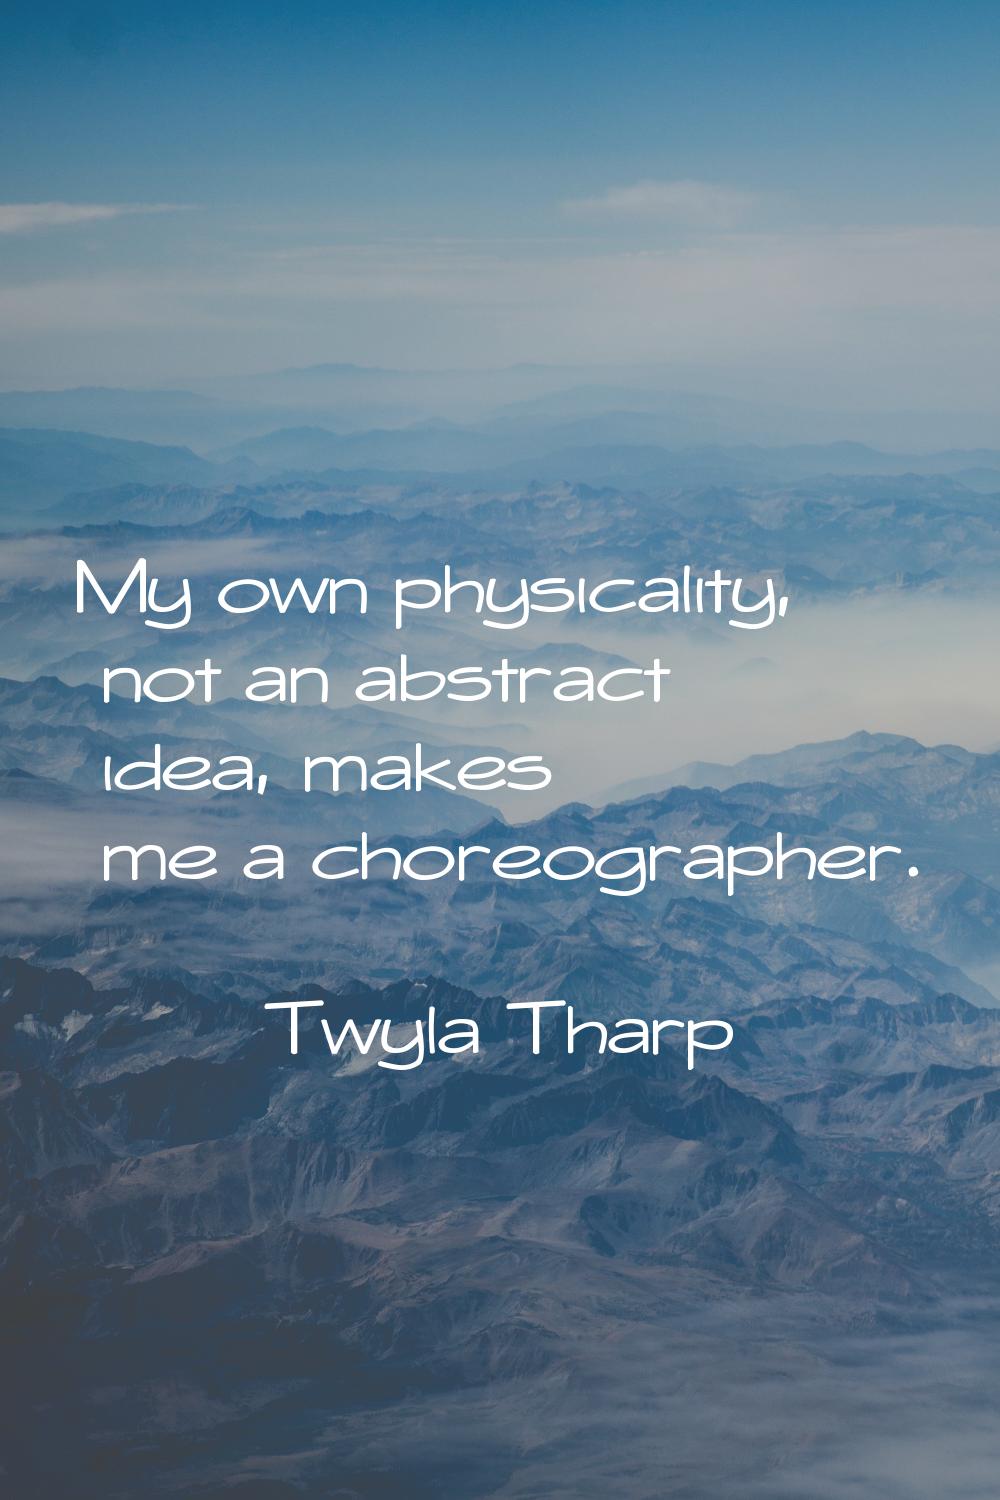 My own physicality, not an abstract idea, makes me a choreographer.